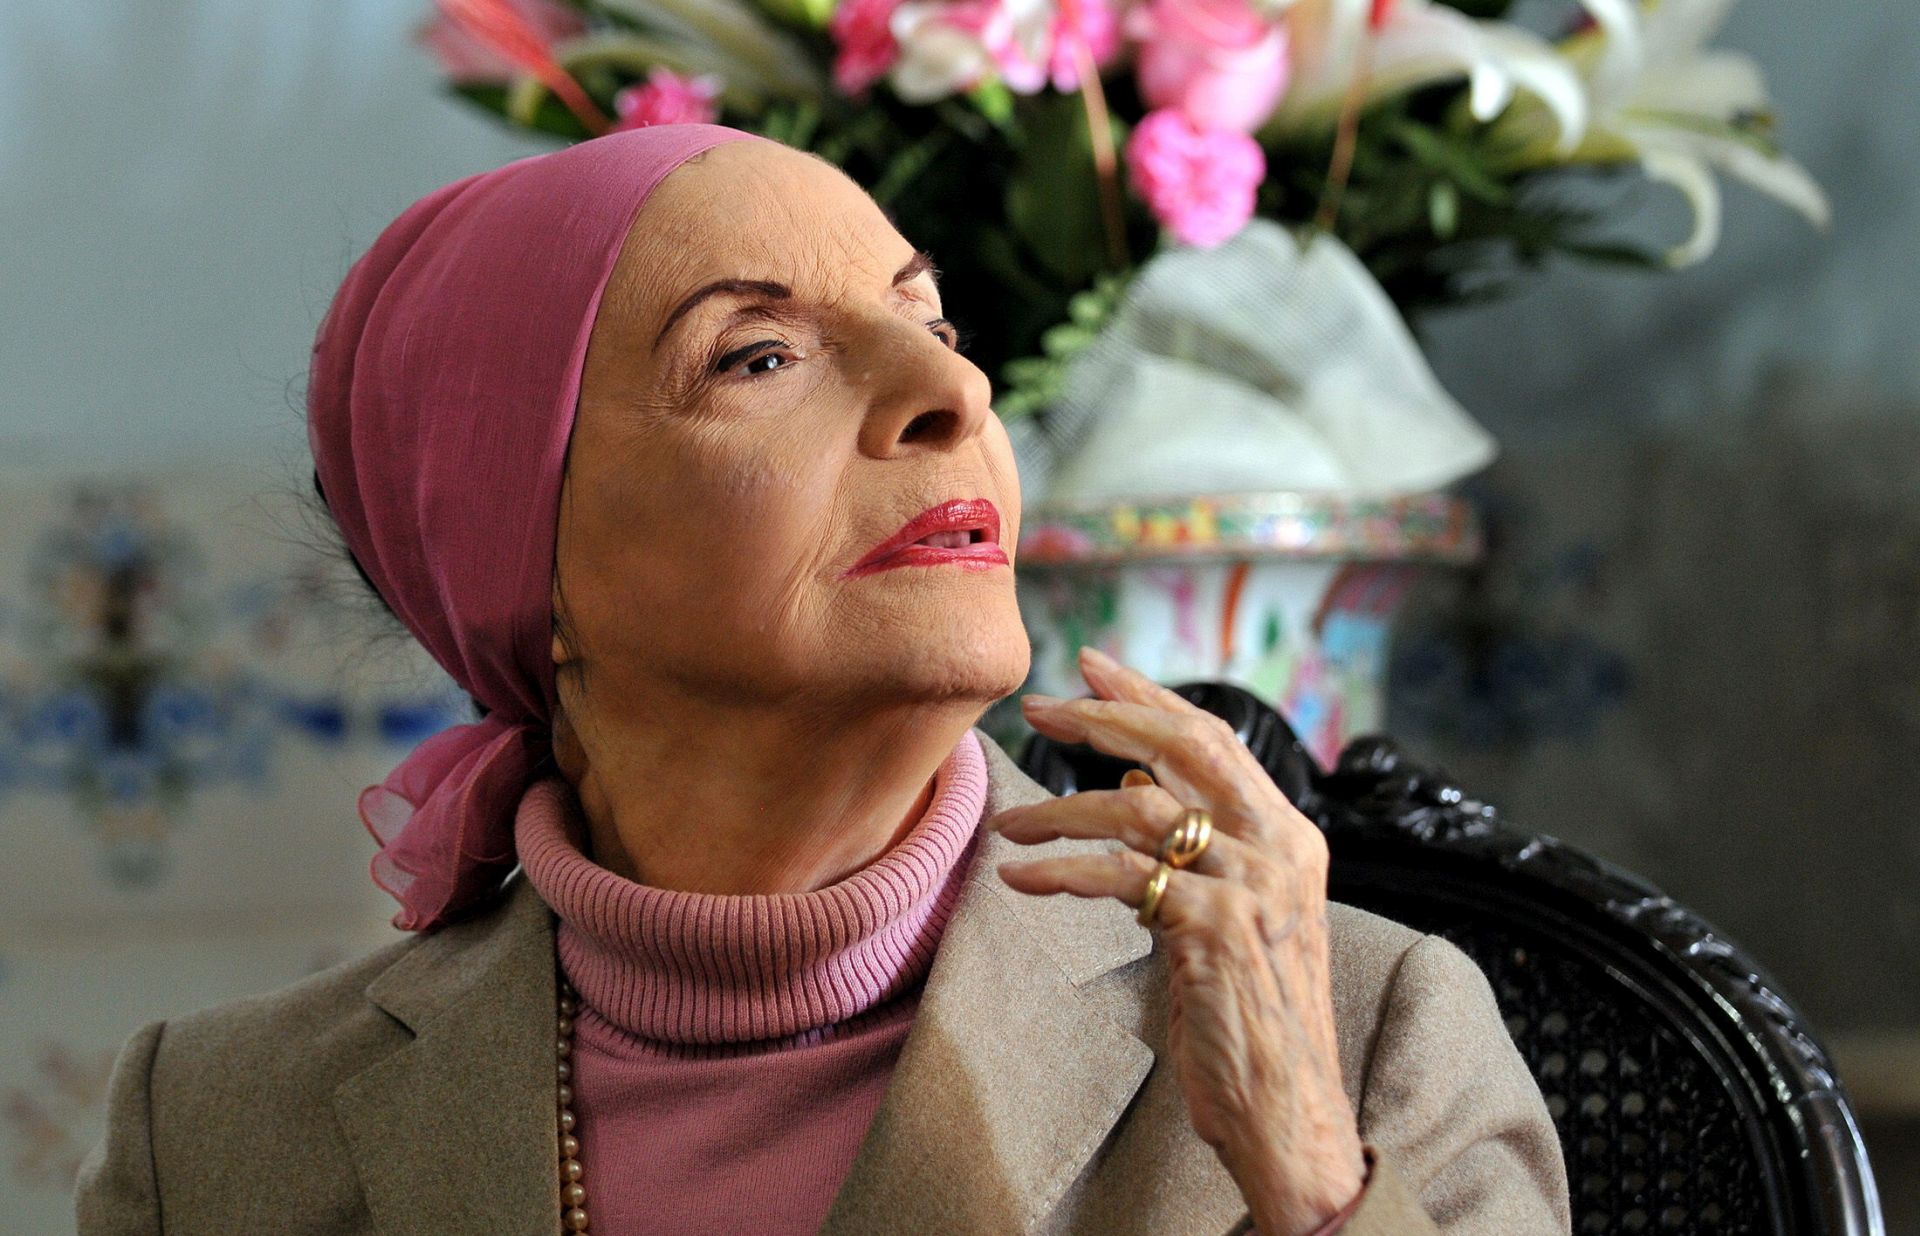 epa07929398 (FILE) Prima ballerina and Cuba National Ballet Director, Alicia Alonso, posing for a photograph during an interview in Havana, Cuba, 04 December 2010 (reissued 18 October 2019). According to reports Alicia Alonso has died aged 98 on 17 October 2019.  EPA/ALEJANDRO ERNESTO